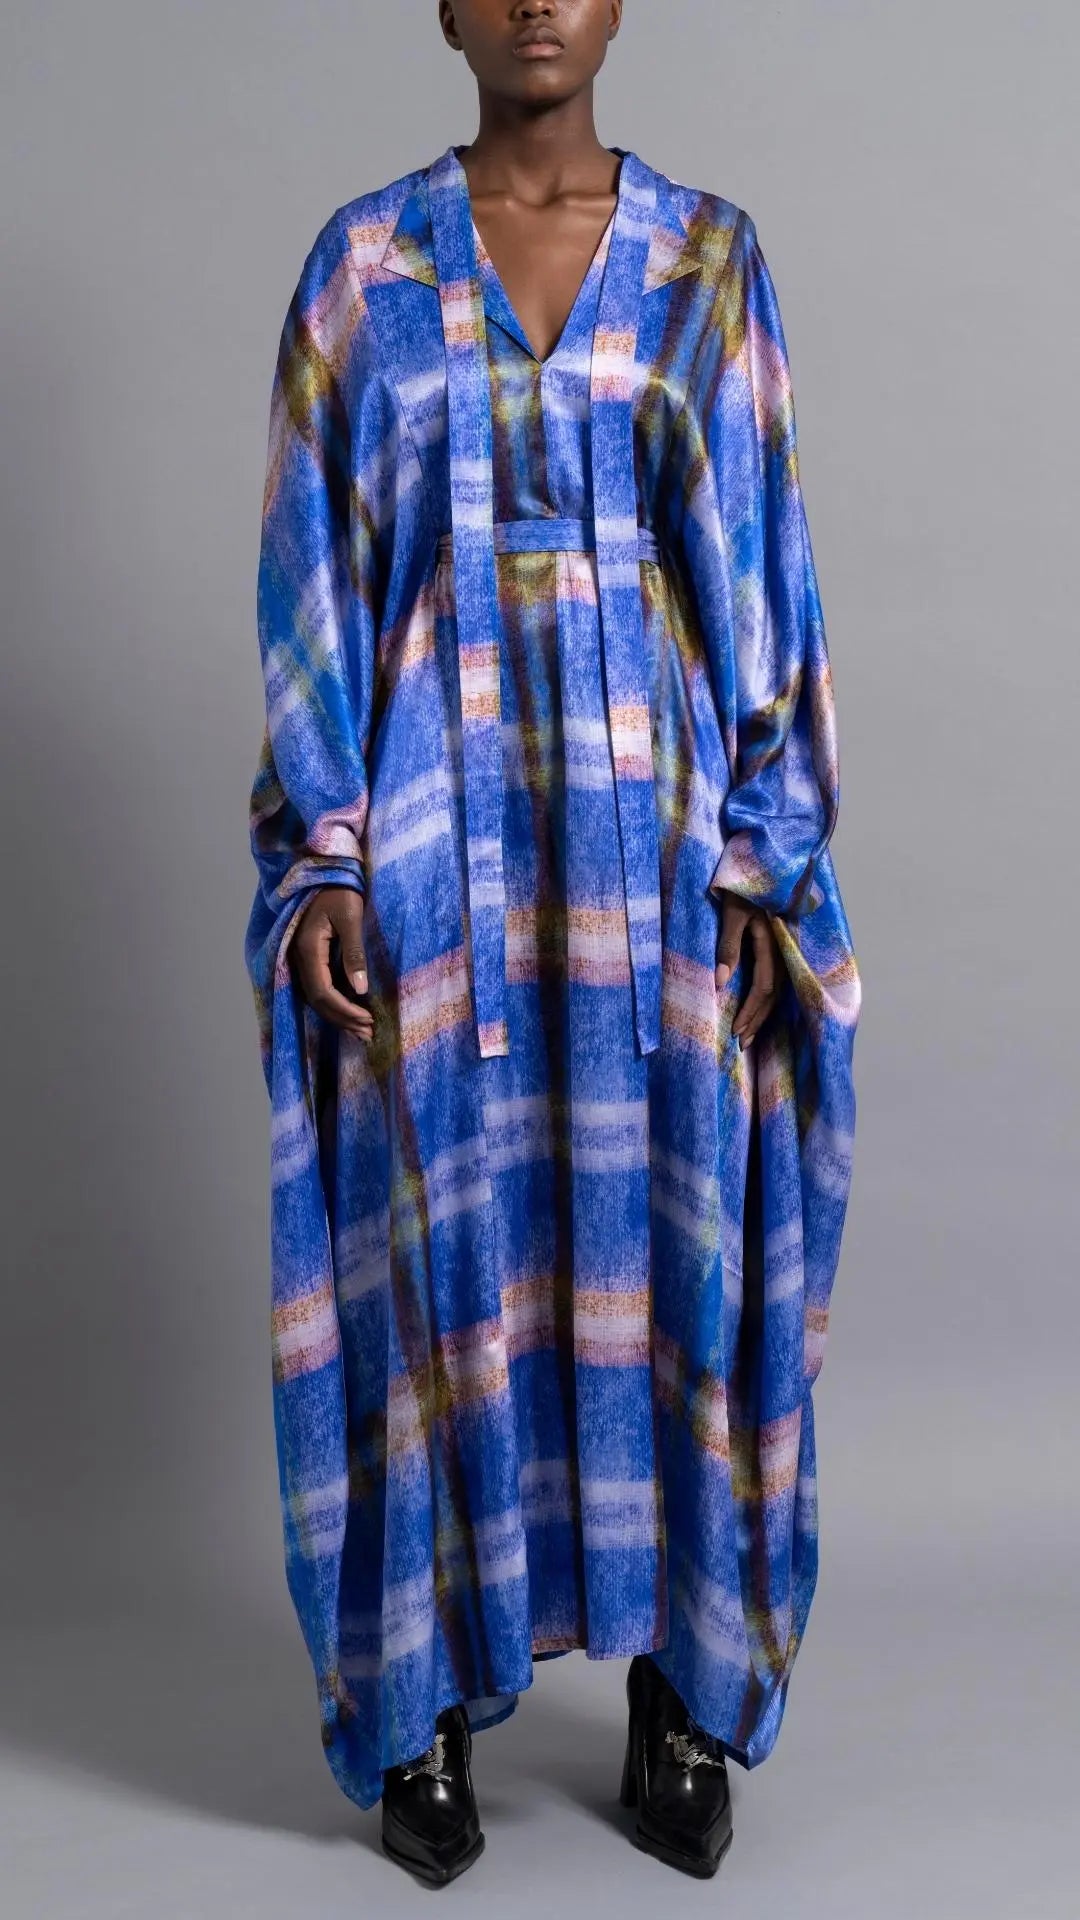 Thebe Magugu Blue Print Belted Kaftan. An elegant draped kaftan dress in blue with soft pink and grey striping. It features a V neck and can be belted to find the perfect fit for your body. It has long sleeves and is floor length. This photo shows the piece on the model facing front.